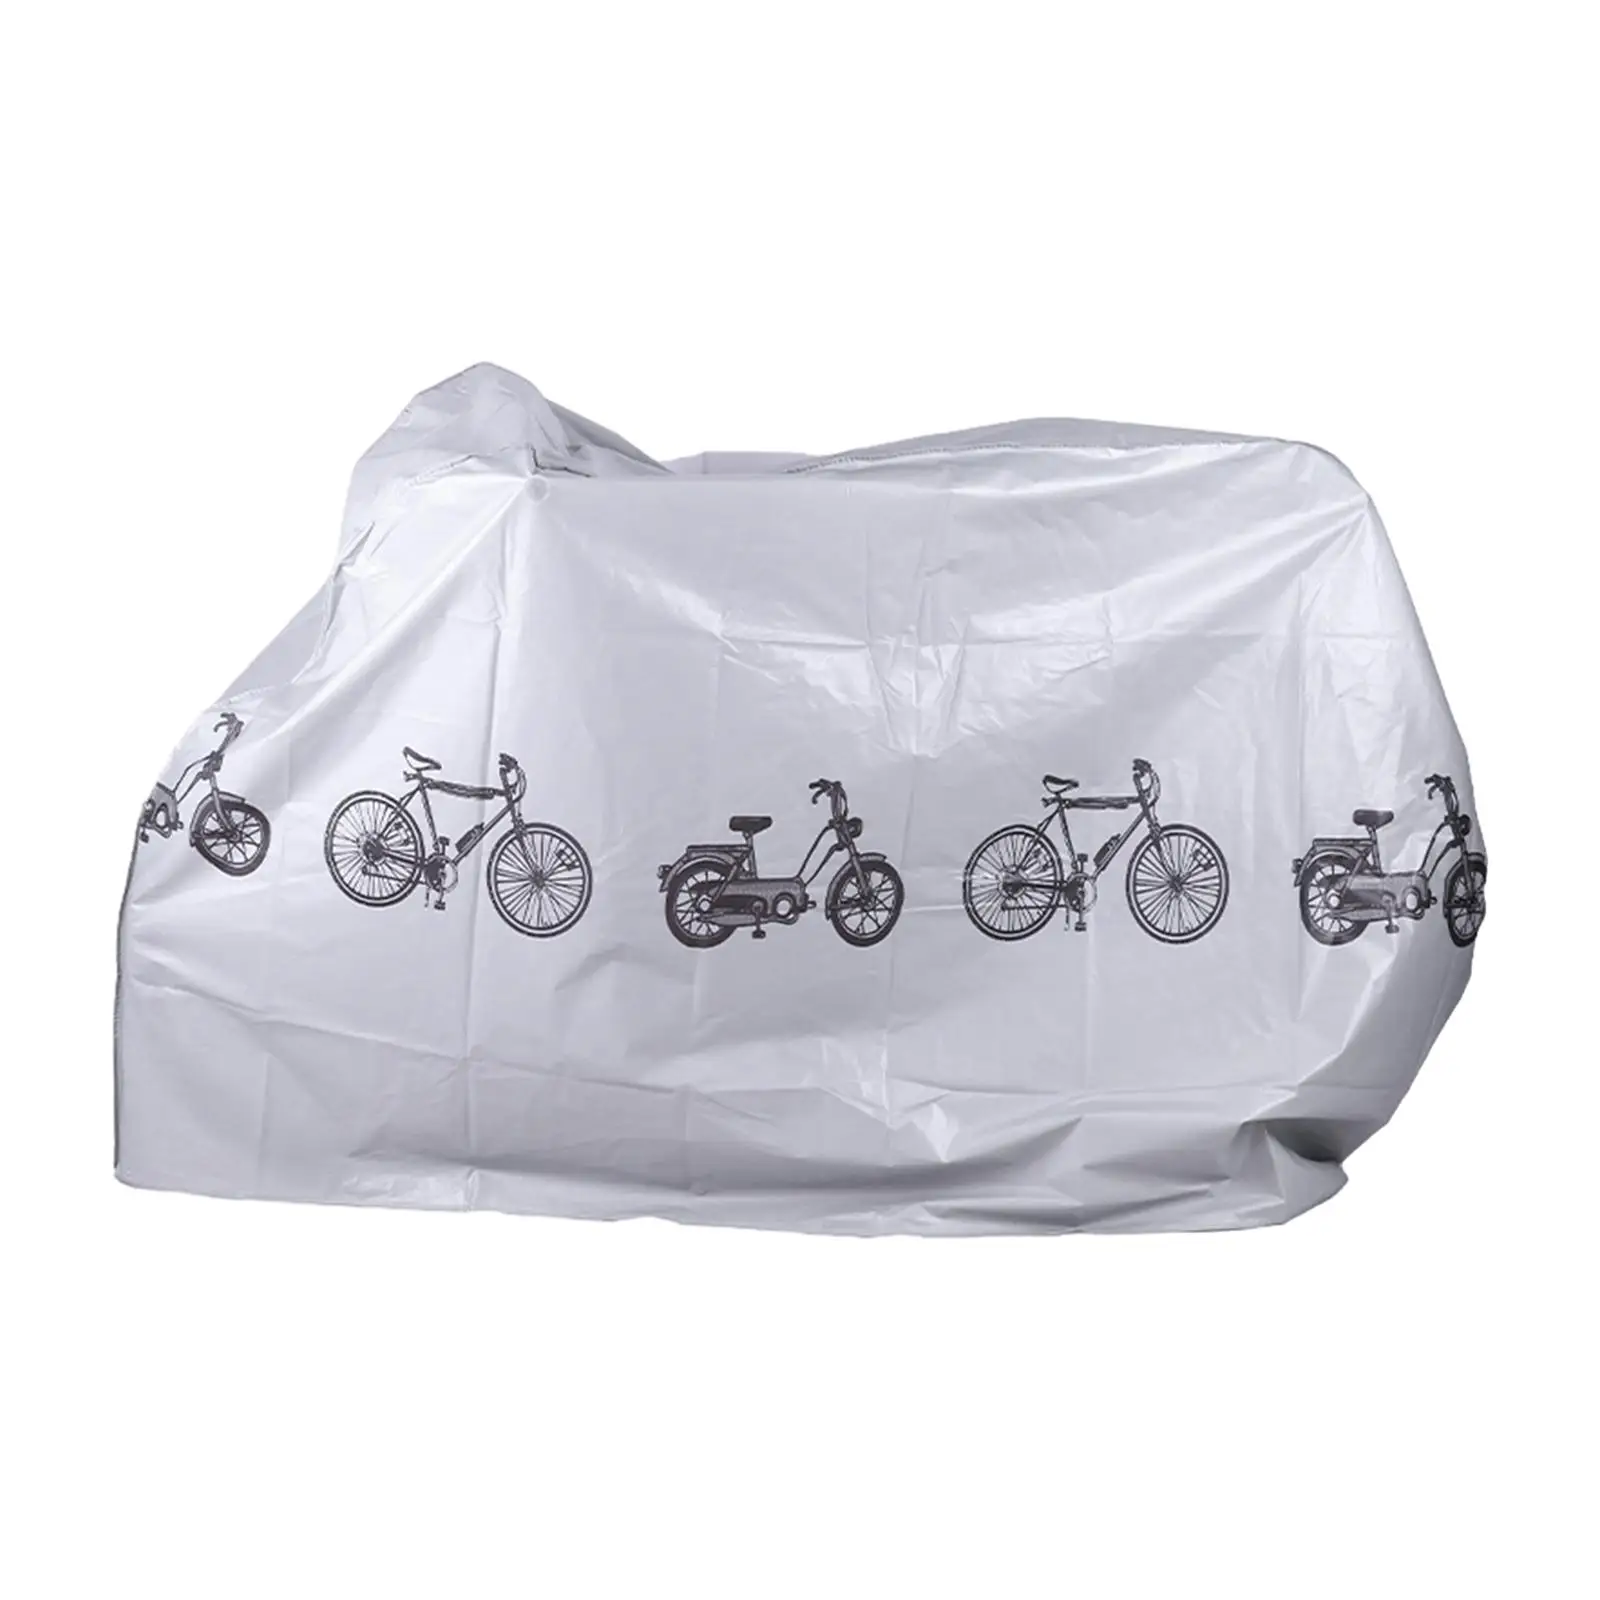 Bike Cover Waterproof Windproof Practical Sun Protection Motorcycle Cover for Road Bike Cycling Riding Mountain Bike Equipment